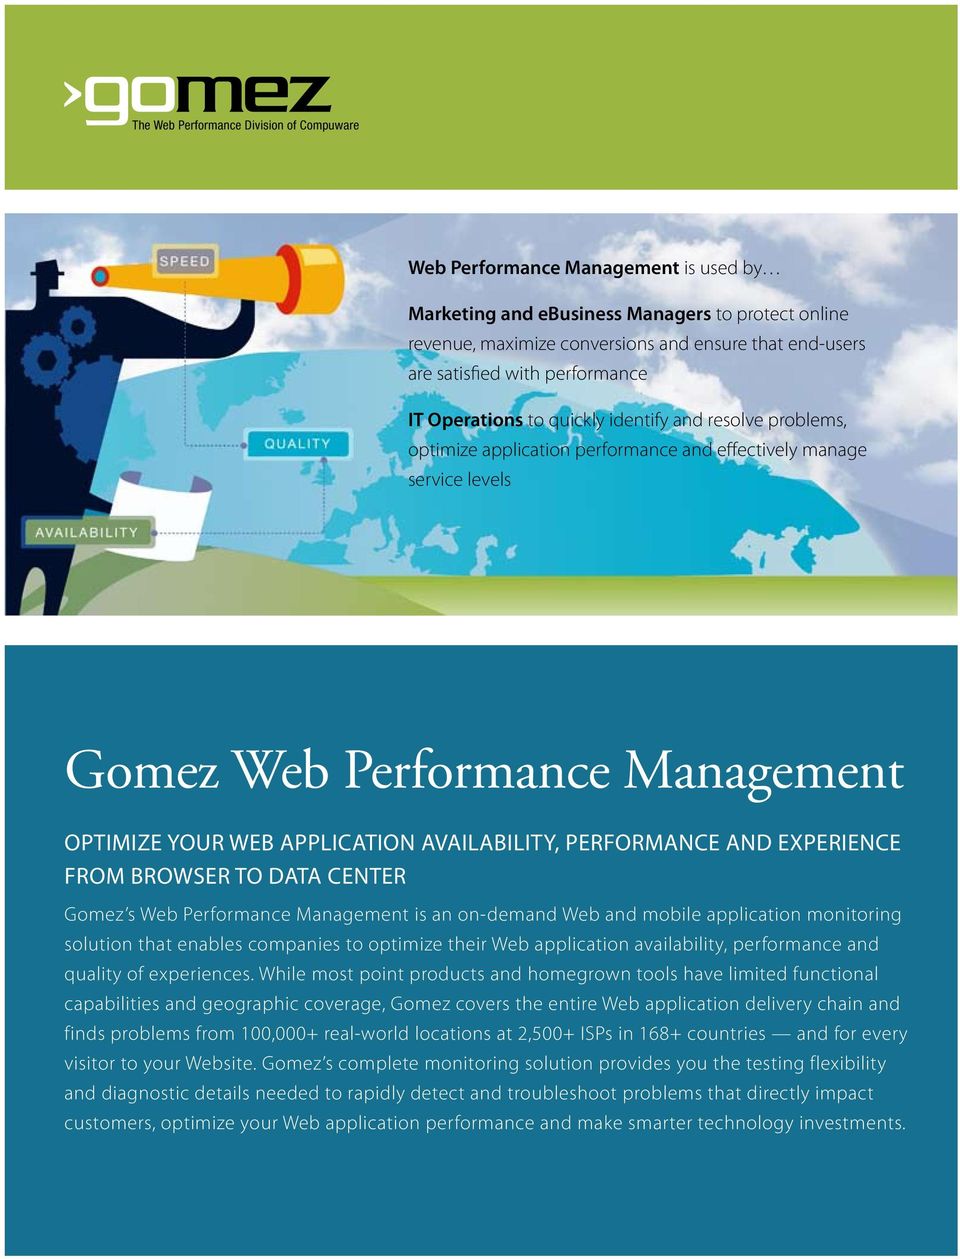 YOUR WEB APPLICATION AVAILABILITY, PERFORMANCE AND EXPERIENCE FROM BROWSER TO DATA CENTER Gomez s Web Performance Management is an on-demand Web and mobile application monitoring solution that